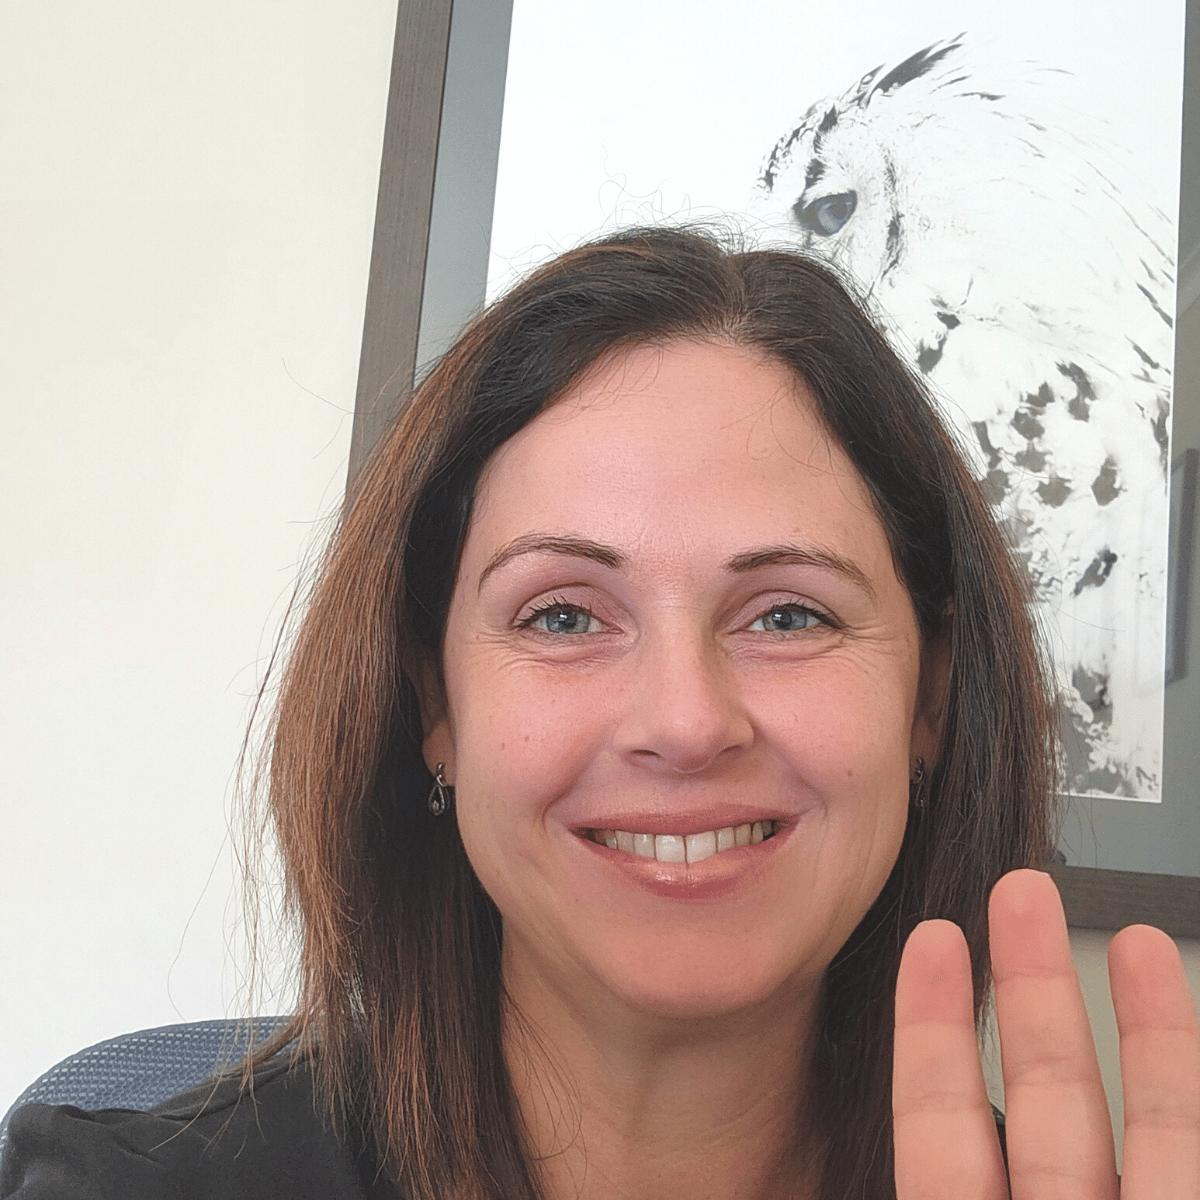 Picture of female small business copywriter waving and smiling at the camera. She has dark hair and is seated in front of a black and white picture of an owl